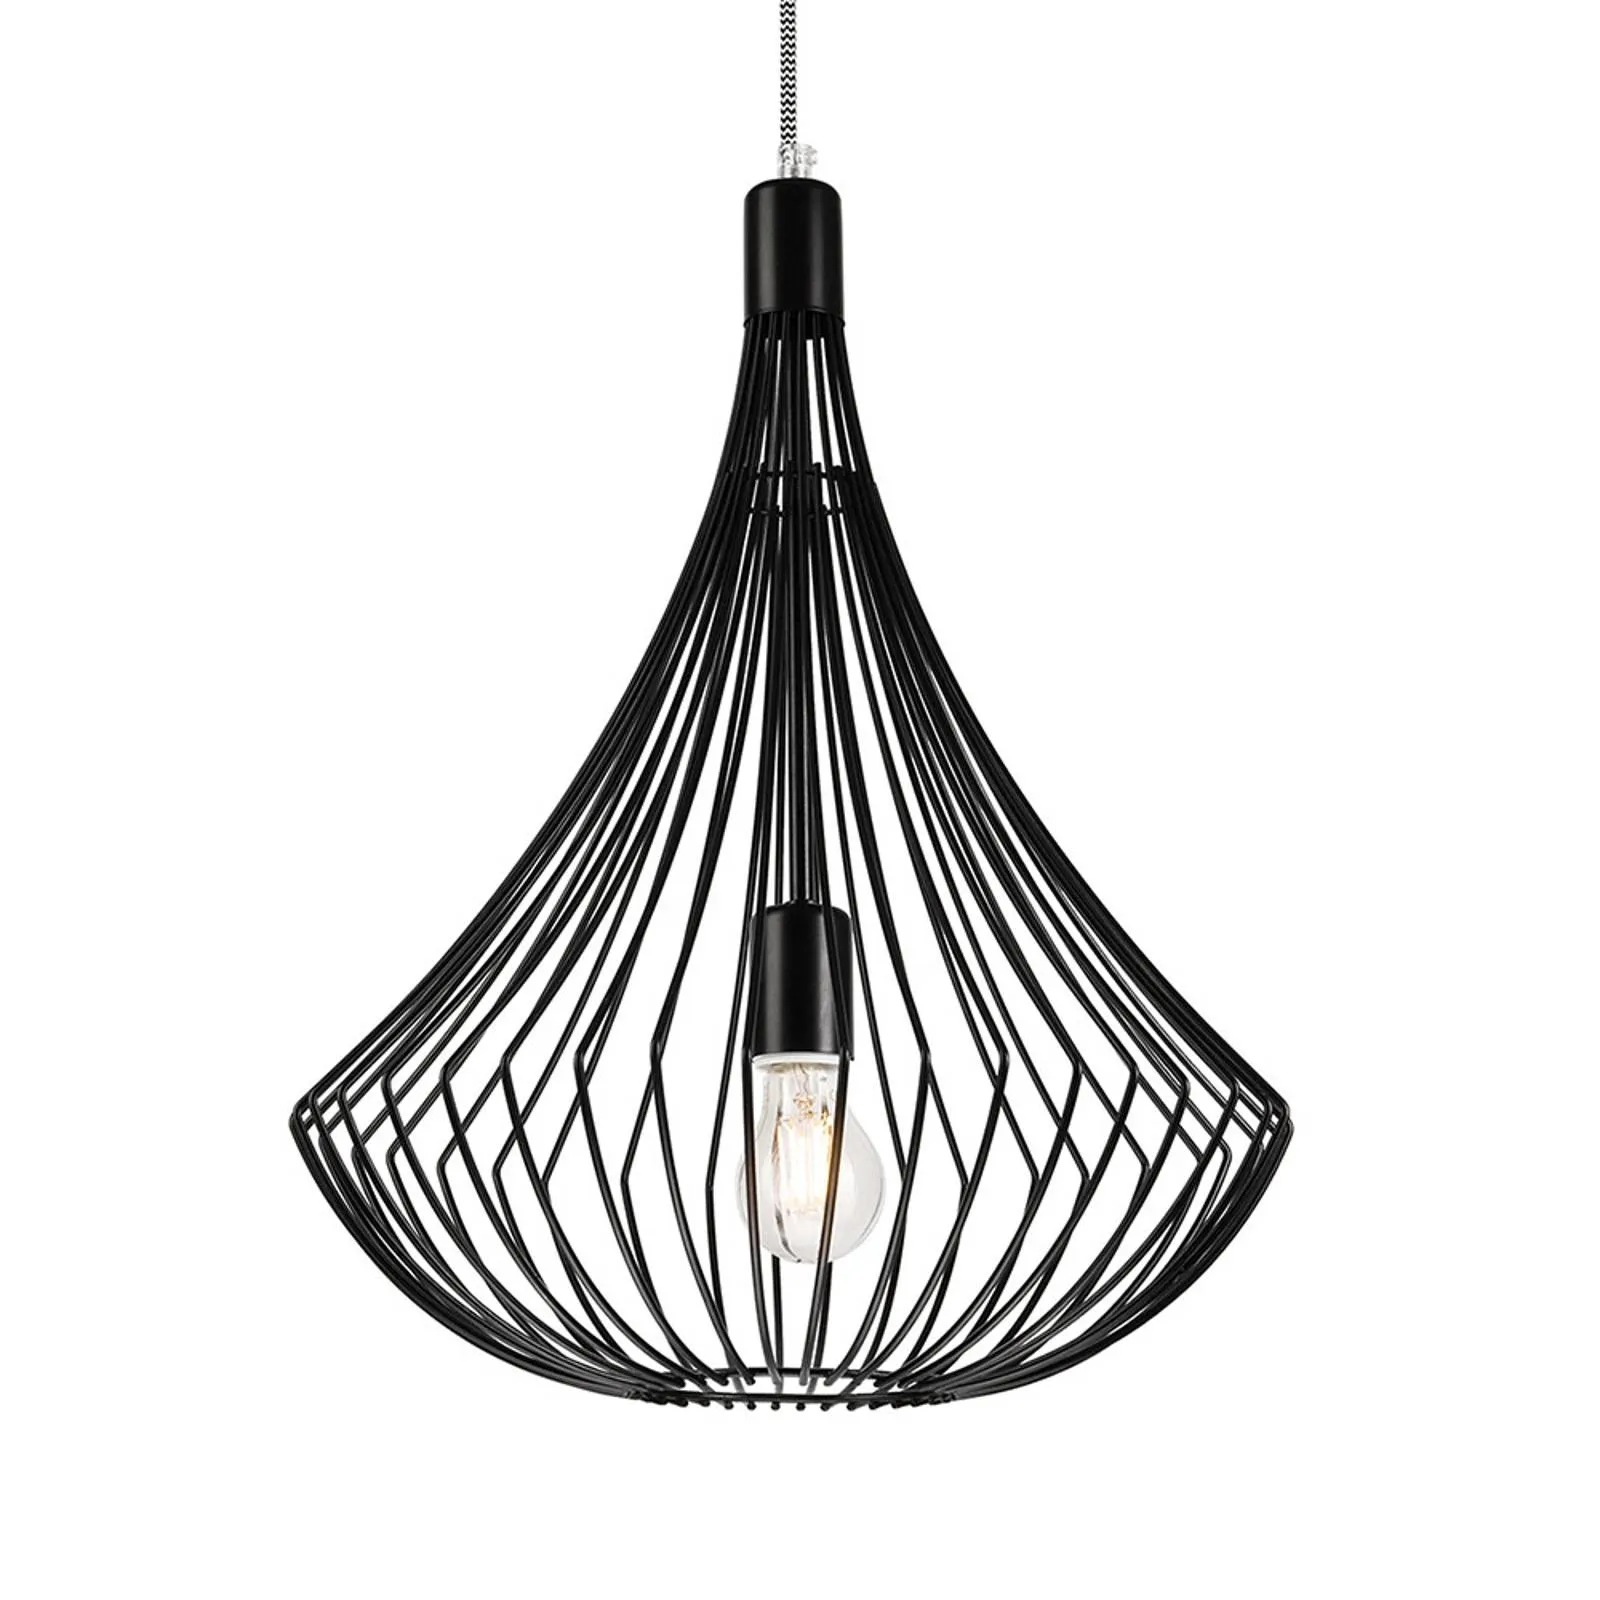 Cage pendant light in black, cage lampshade